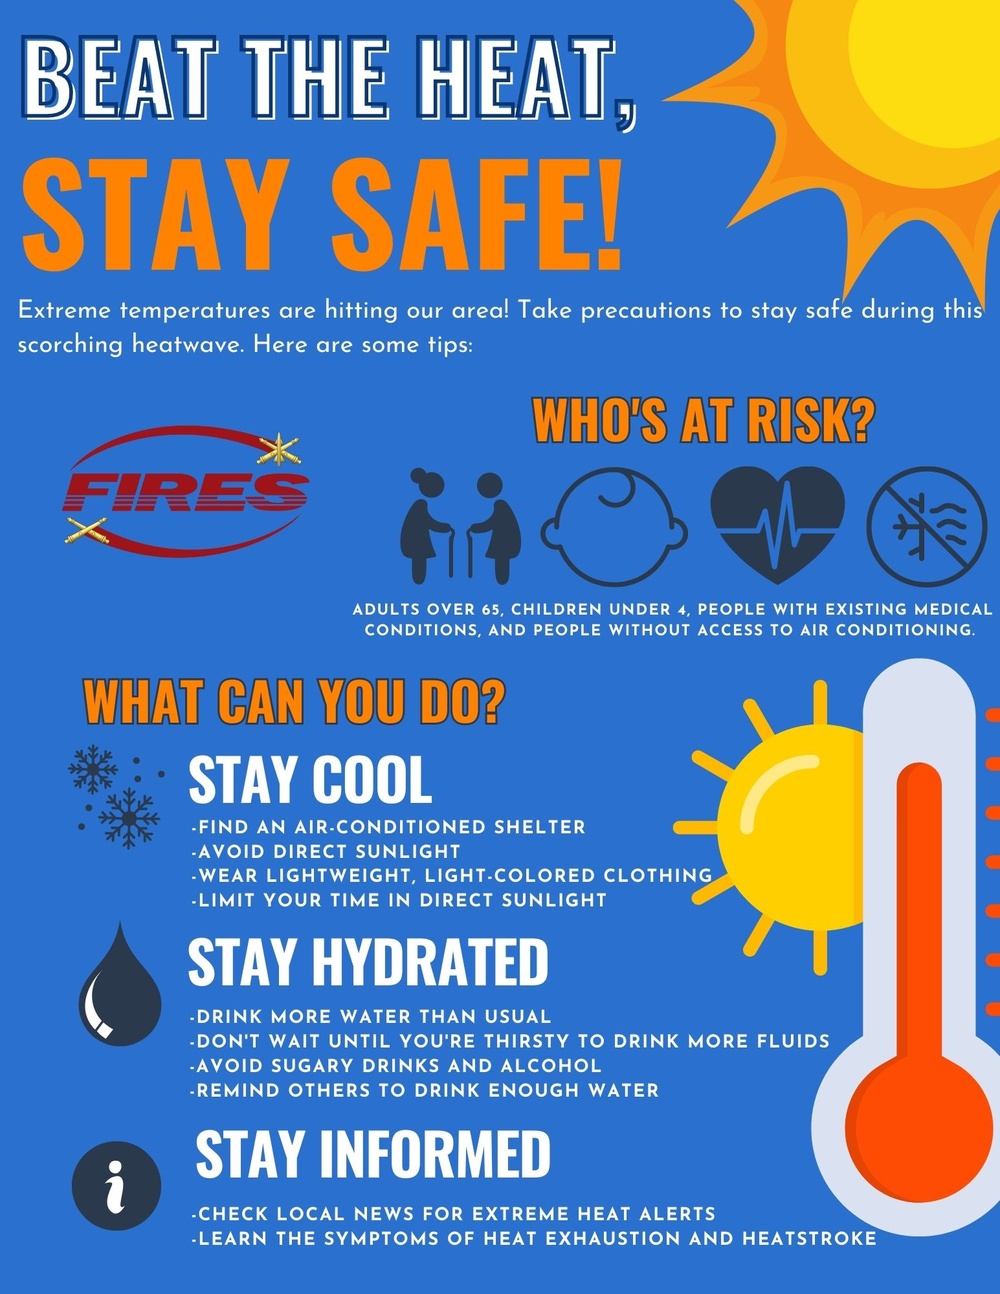 DVIDS - News - Fort Sill: Stay Safe in the Summer Heat